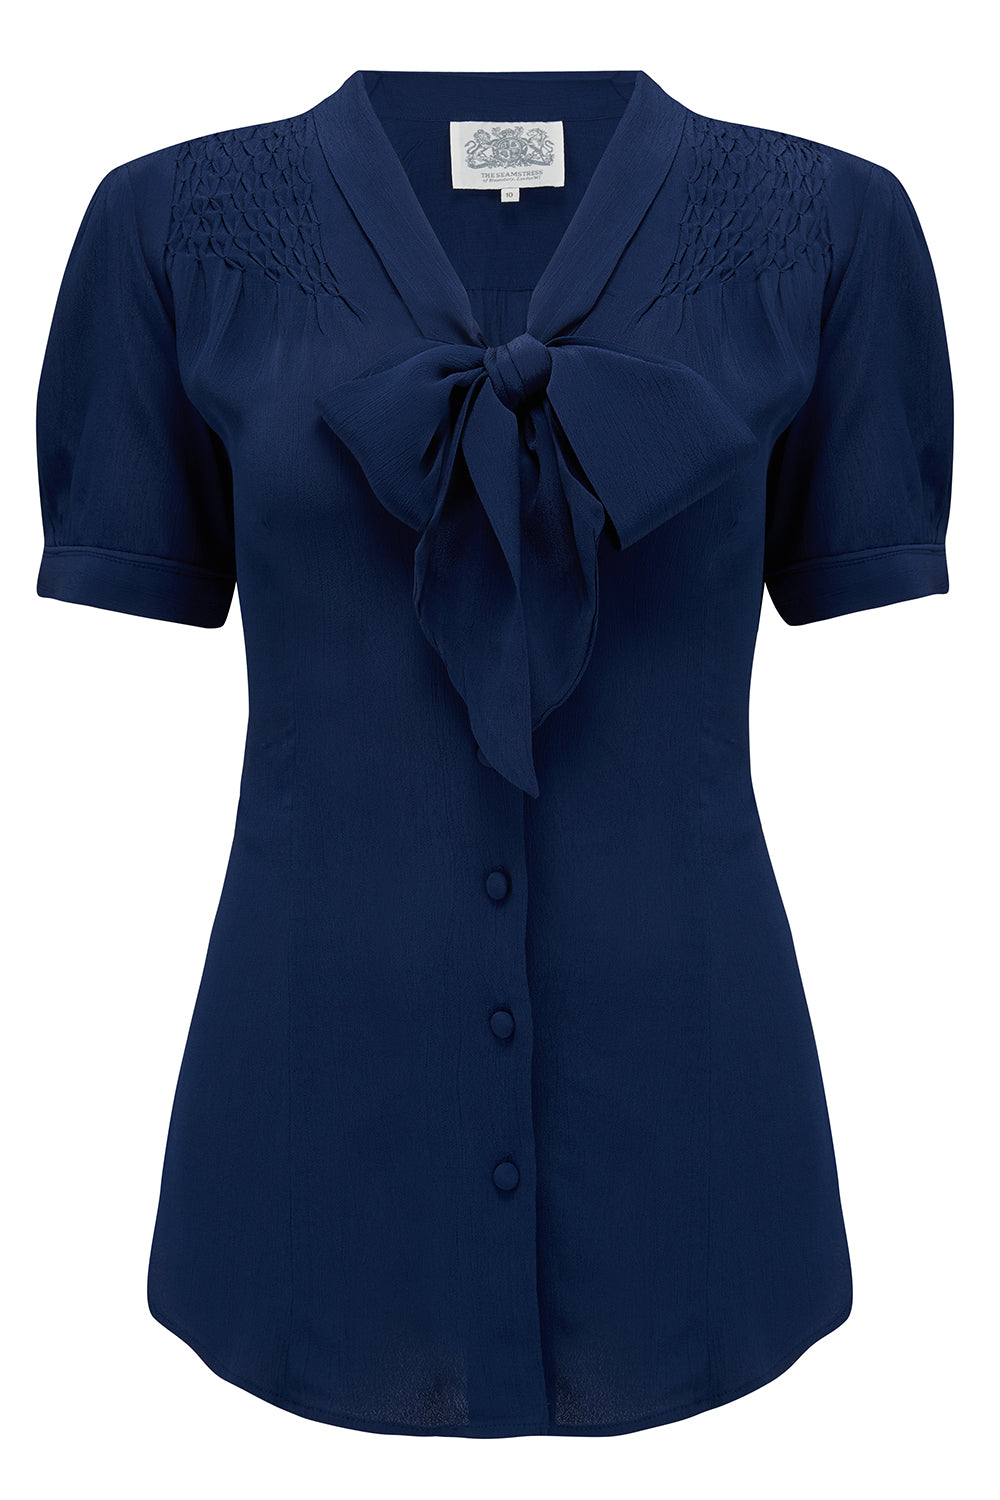 Eva Blouse short sleeve in Navy Blue, Authentic & Classic 1940s Vintage Style - True and authentic vintage style clothing, inspired by the Classic styles of CC41 , WW2 and the fun 1950s RocknRoll era, for everyday wear plus events like Goodwood Revival, Twinwood Festival and Viva Las Vegas Rockabilly Weekend Rock n Romance The Seamstress Of Bloomsbury